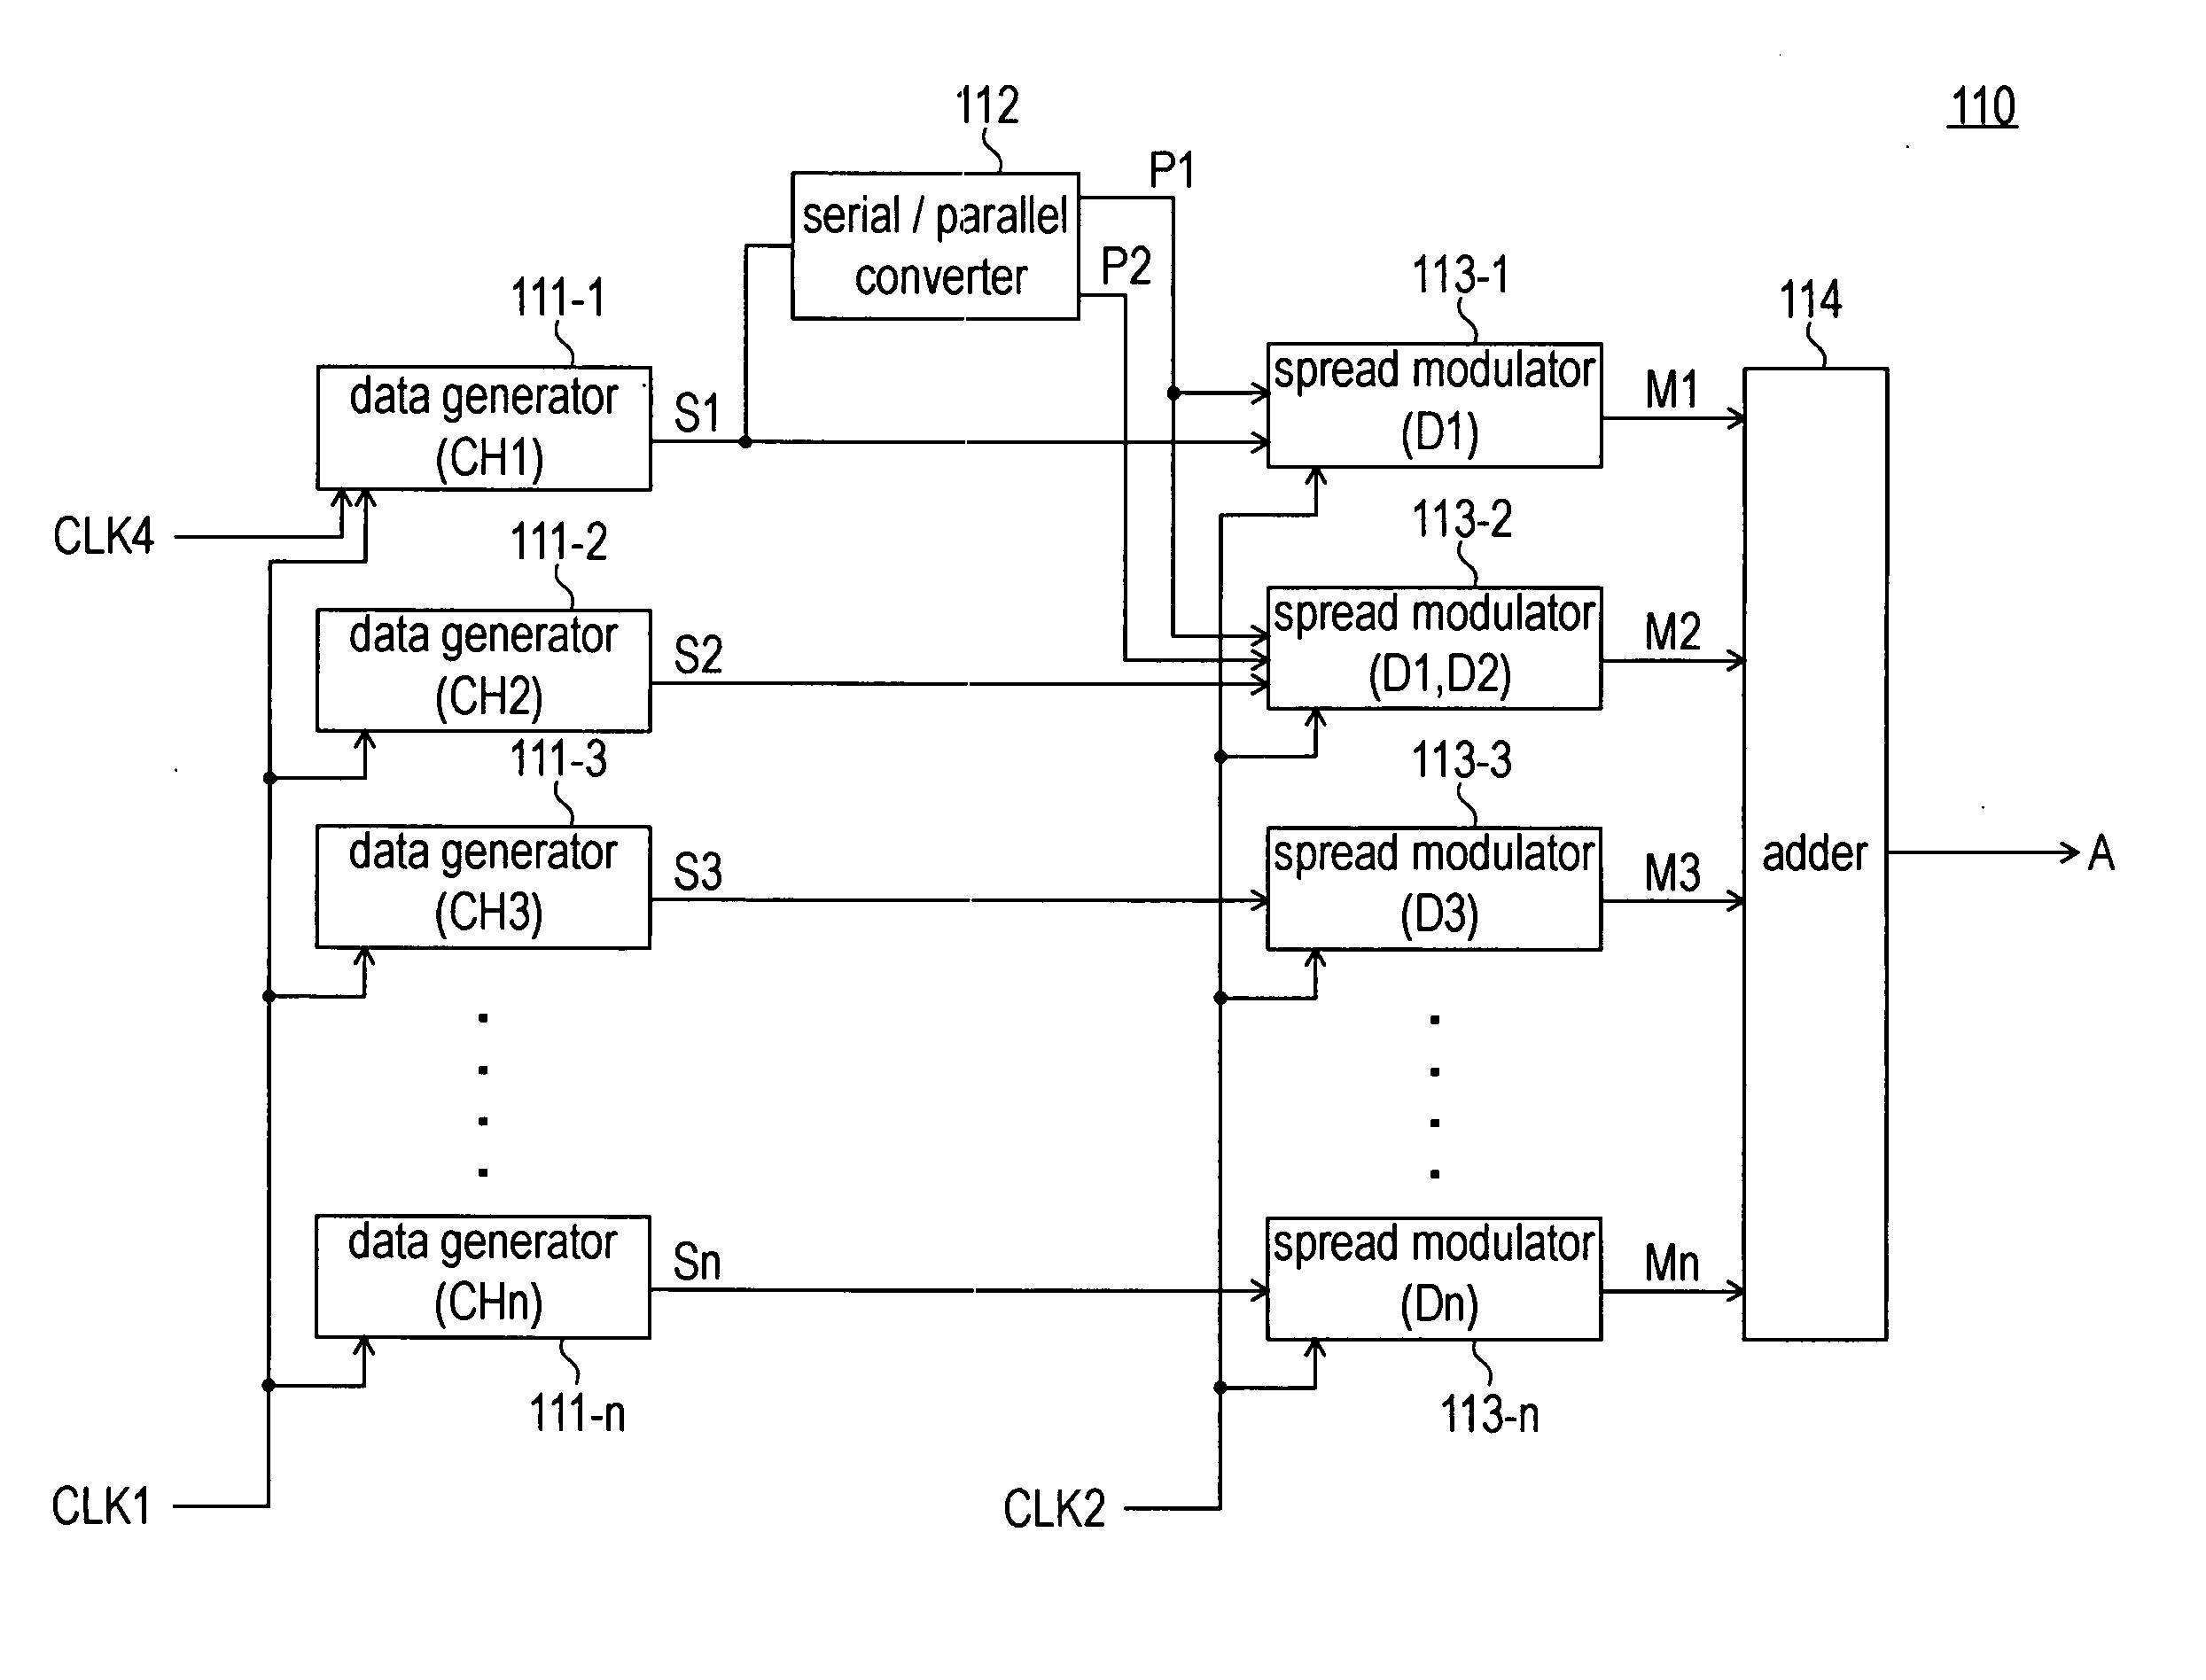 Code division multiplexing communication system